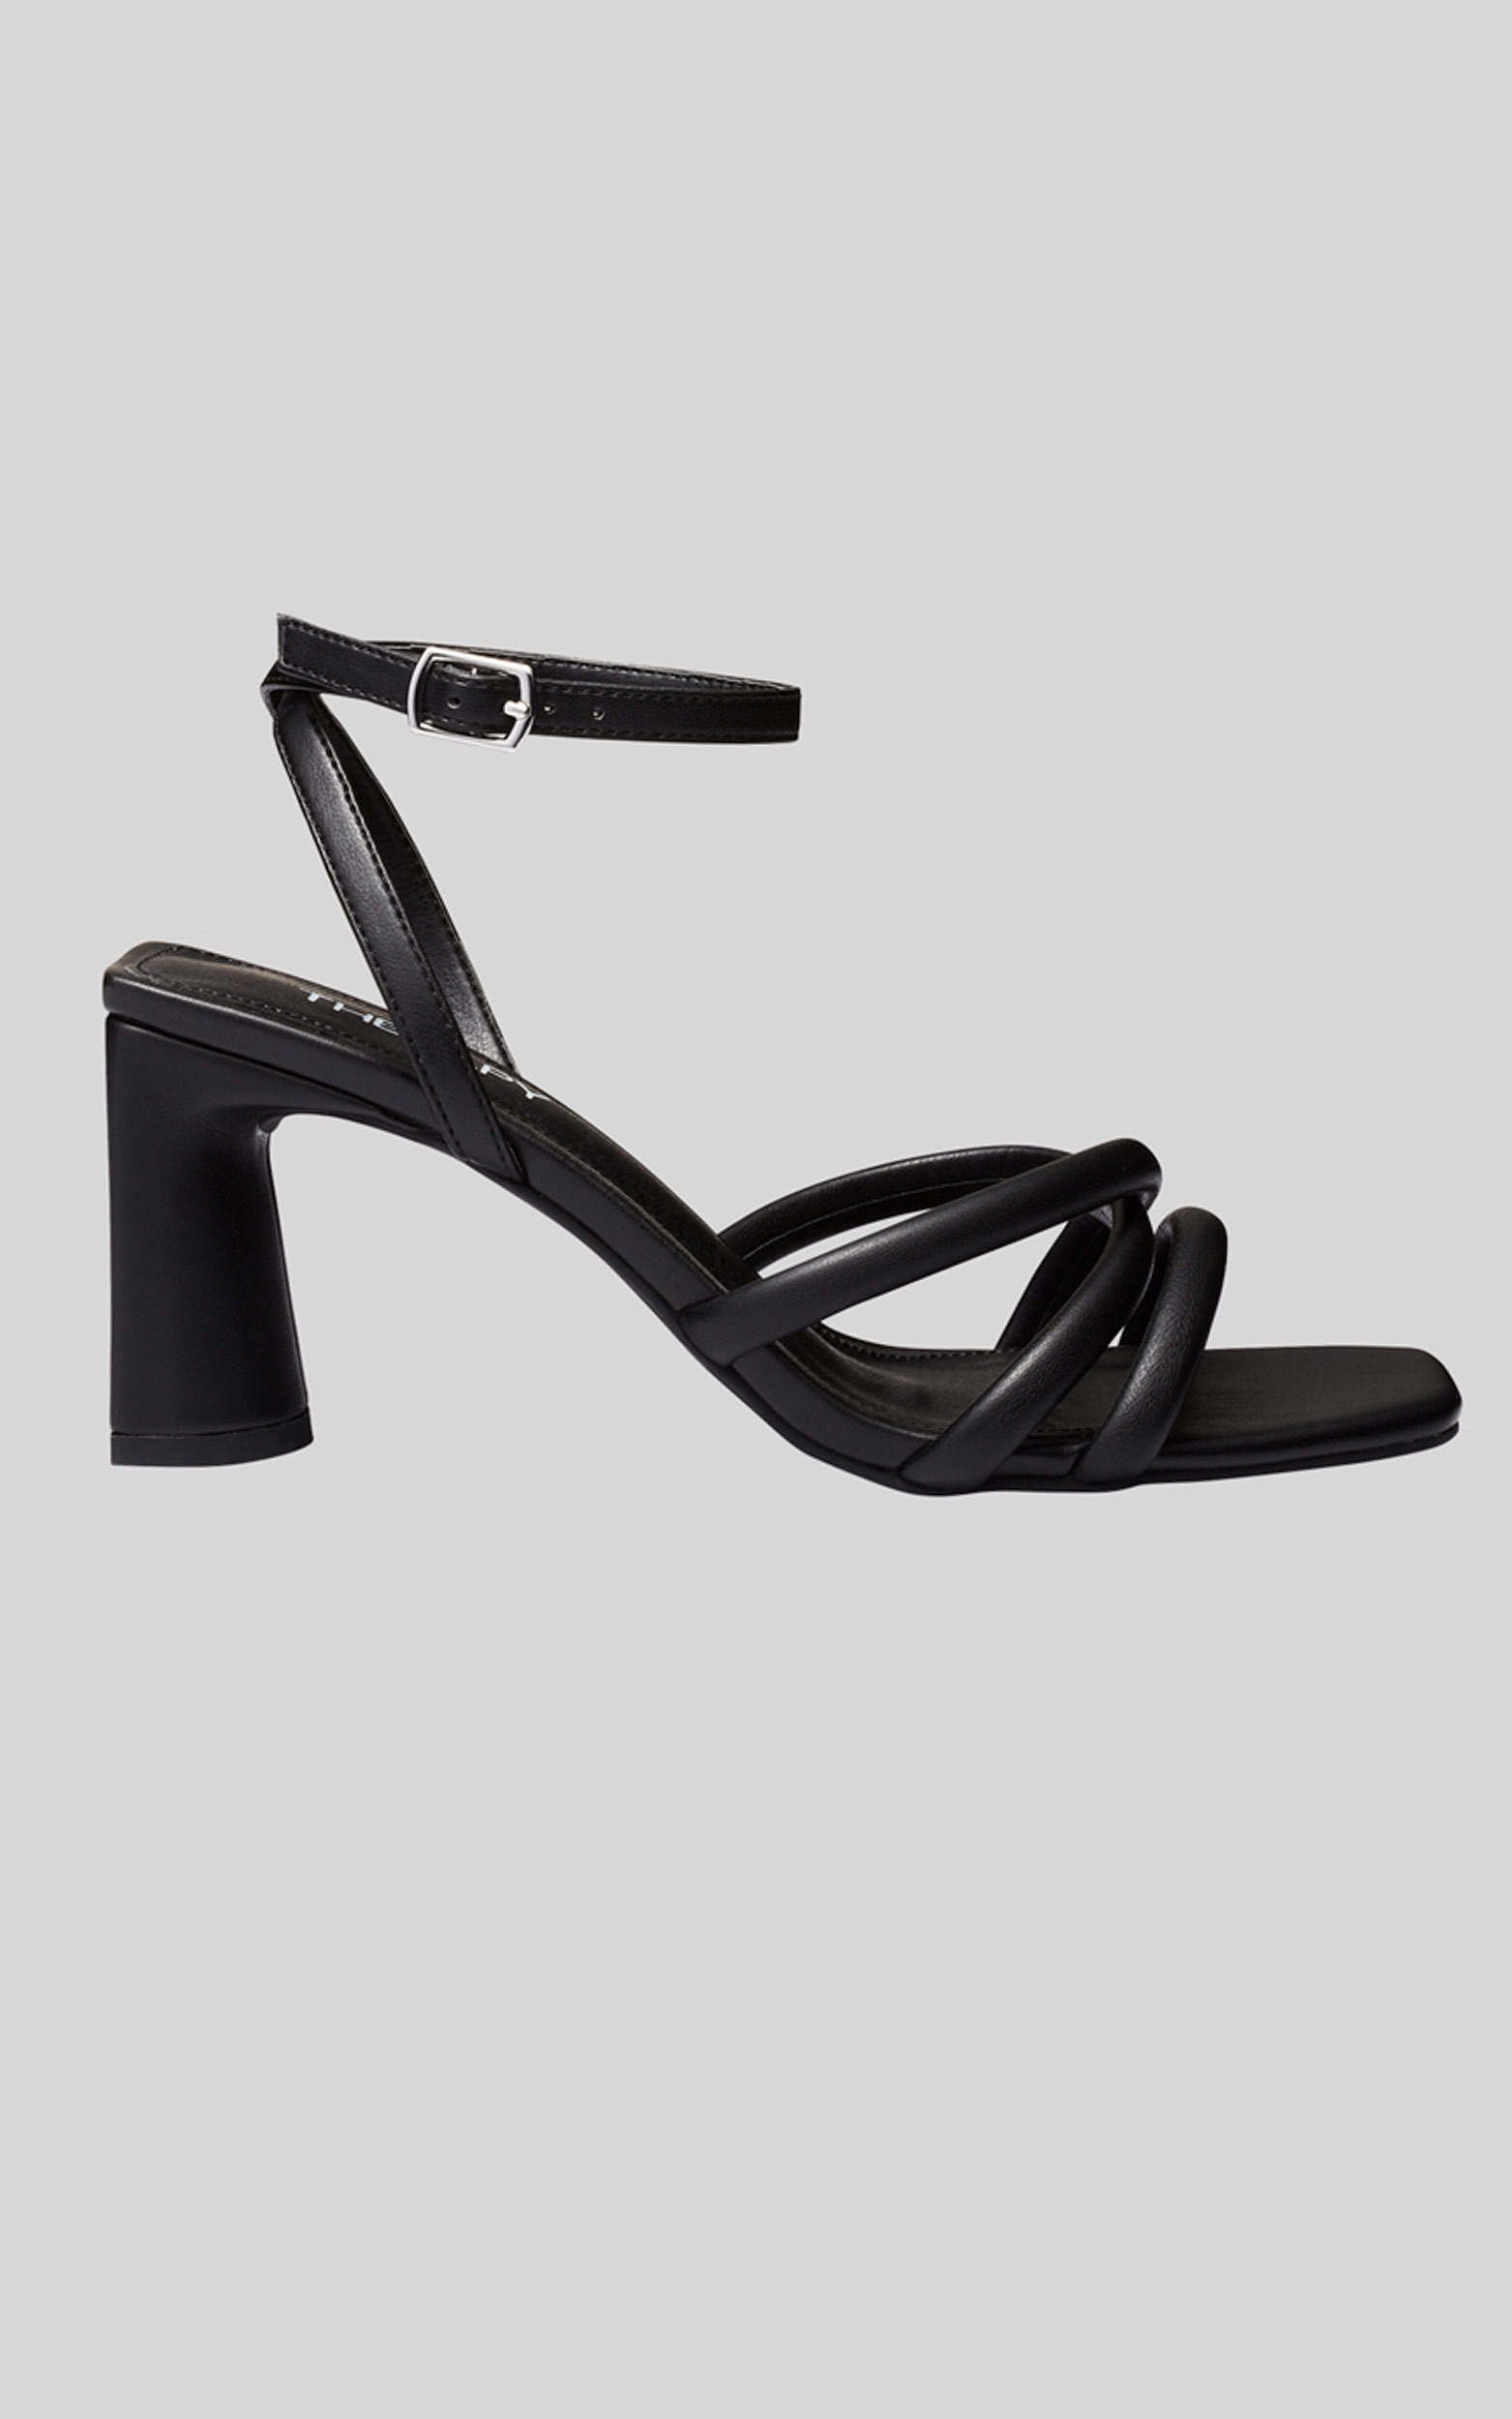 Therapy - Kade Heels in Black - 05, BLK1, hi-res image number null